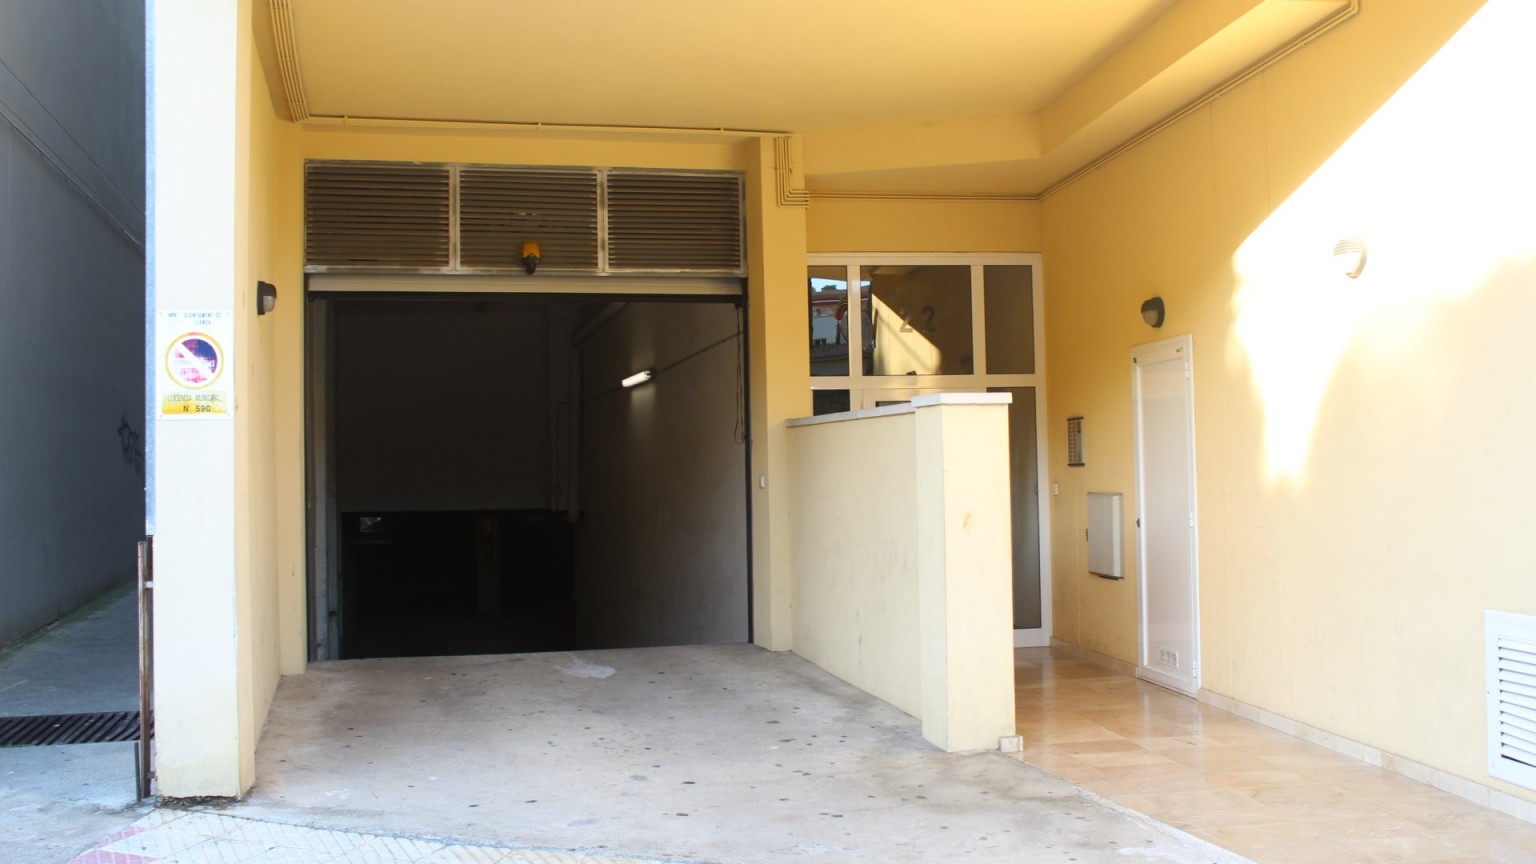 Parking place  for rent situated in the center of La Vila.